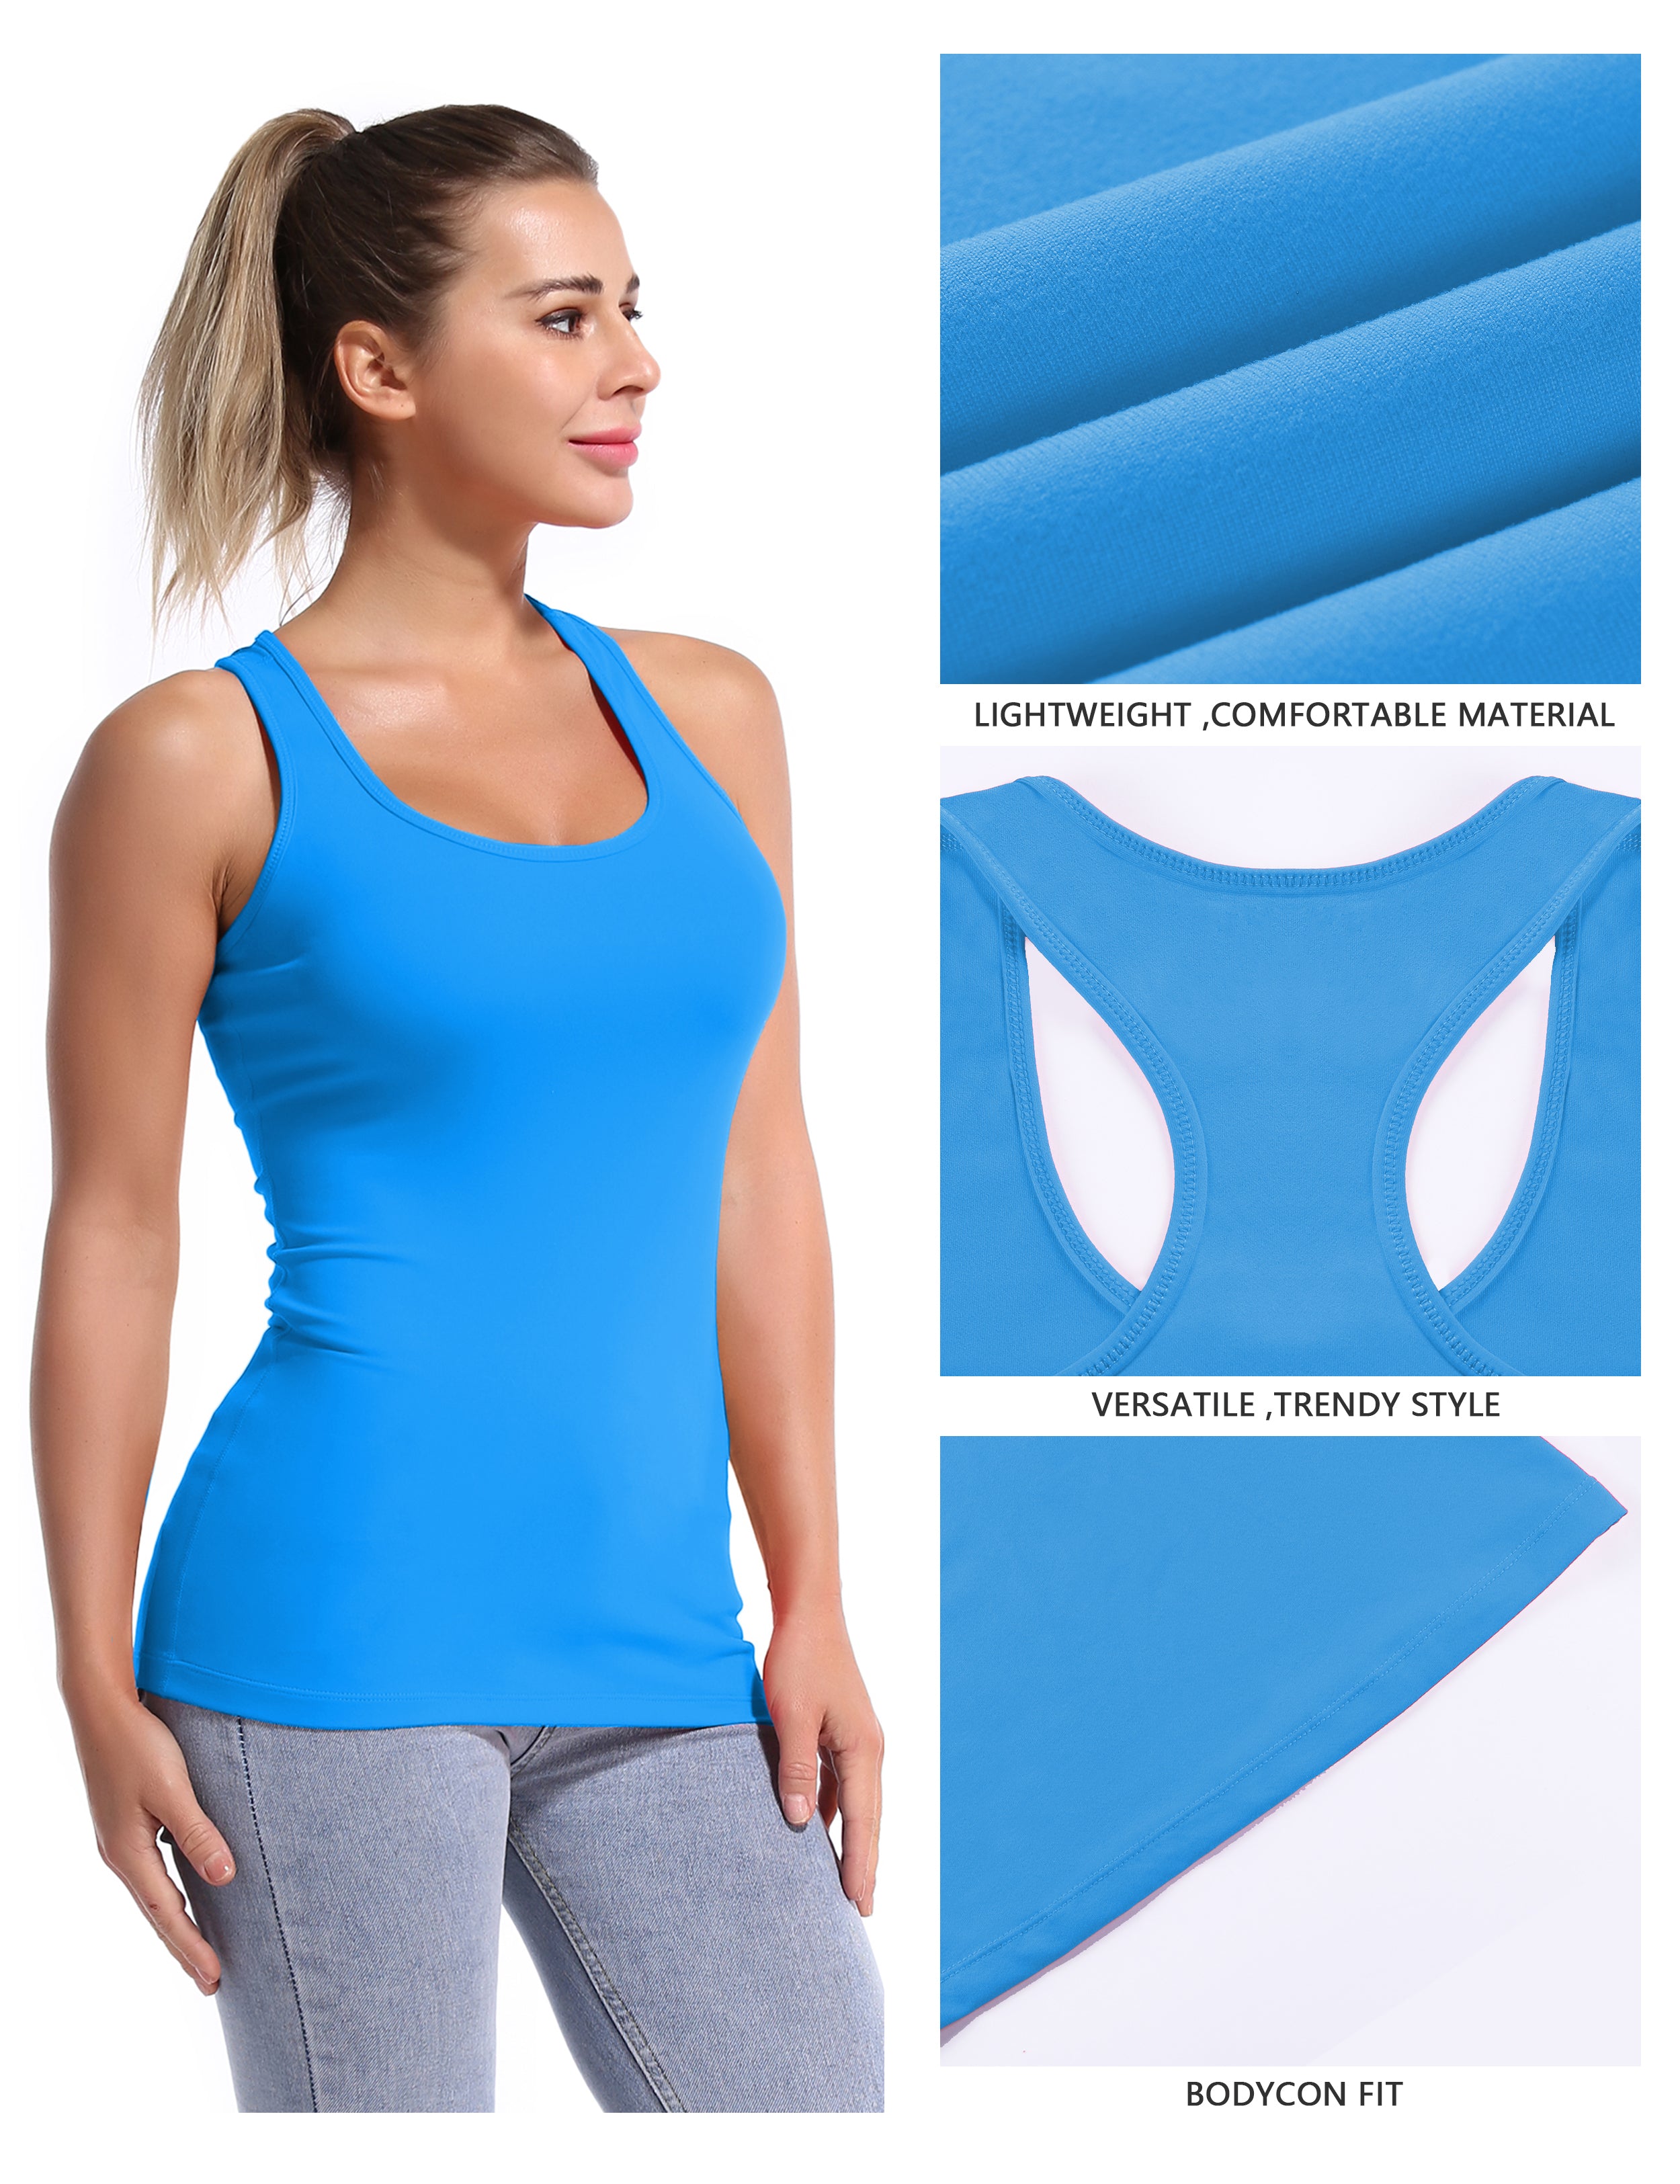 Racerback Athletic Tank Tops electricblue 92%Nylon/8%Spandex(Cotton Soft) Designed for Tall Size Tight Fit So buttery soft, it feels weightless Sweat-wicking Four-way stretch Breathable Contours your body Sits below the waistband for moderate, everyday coverage